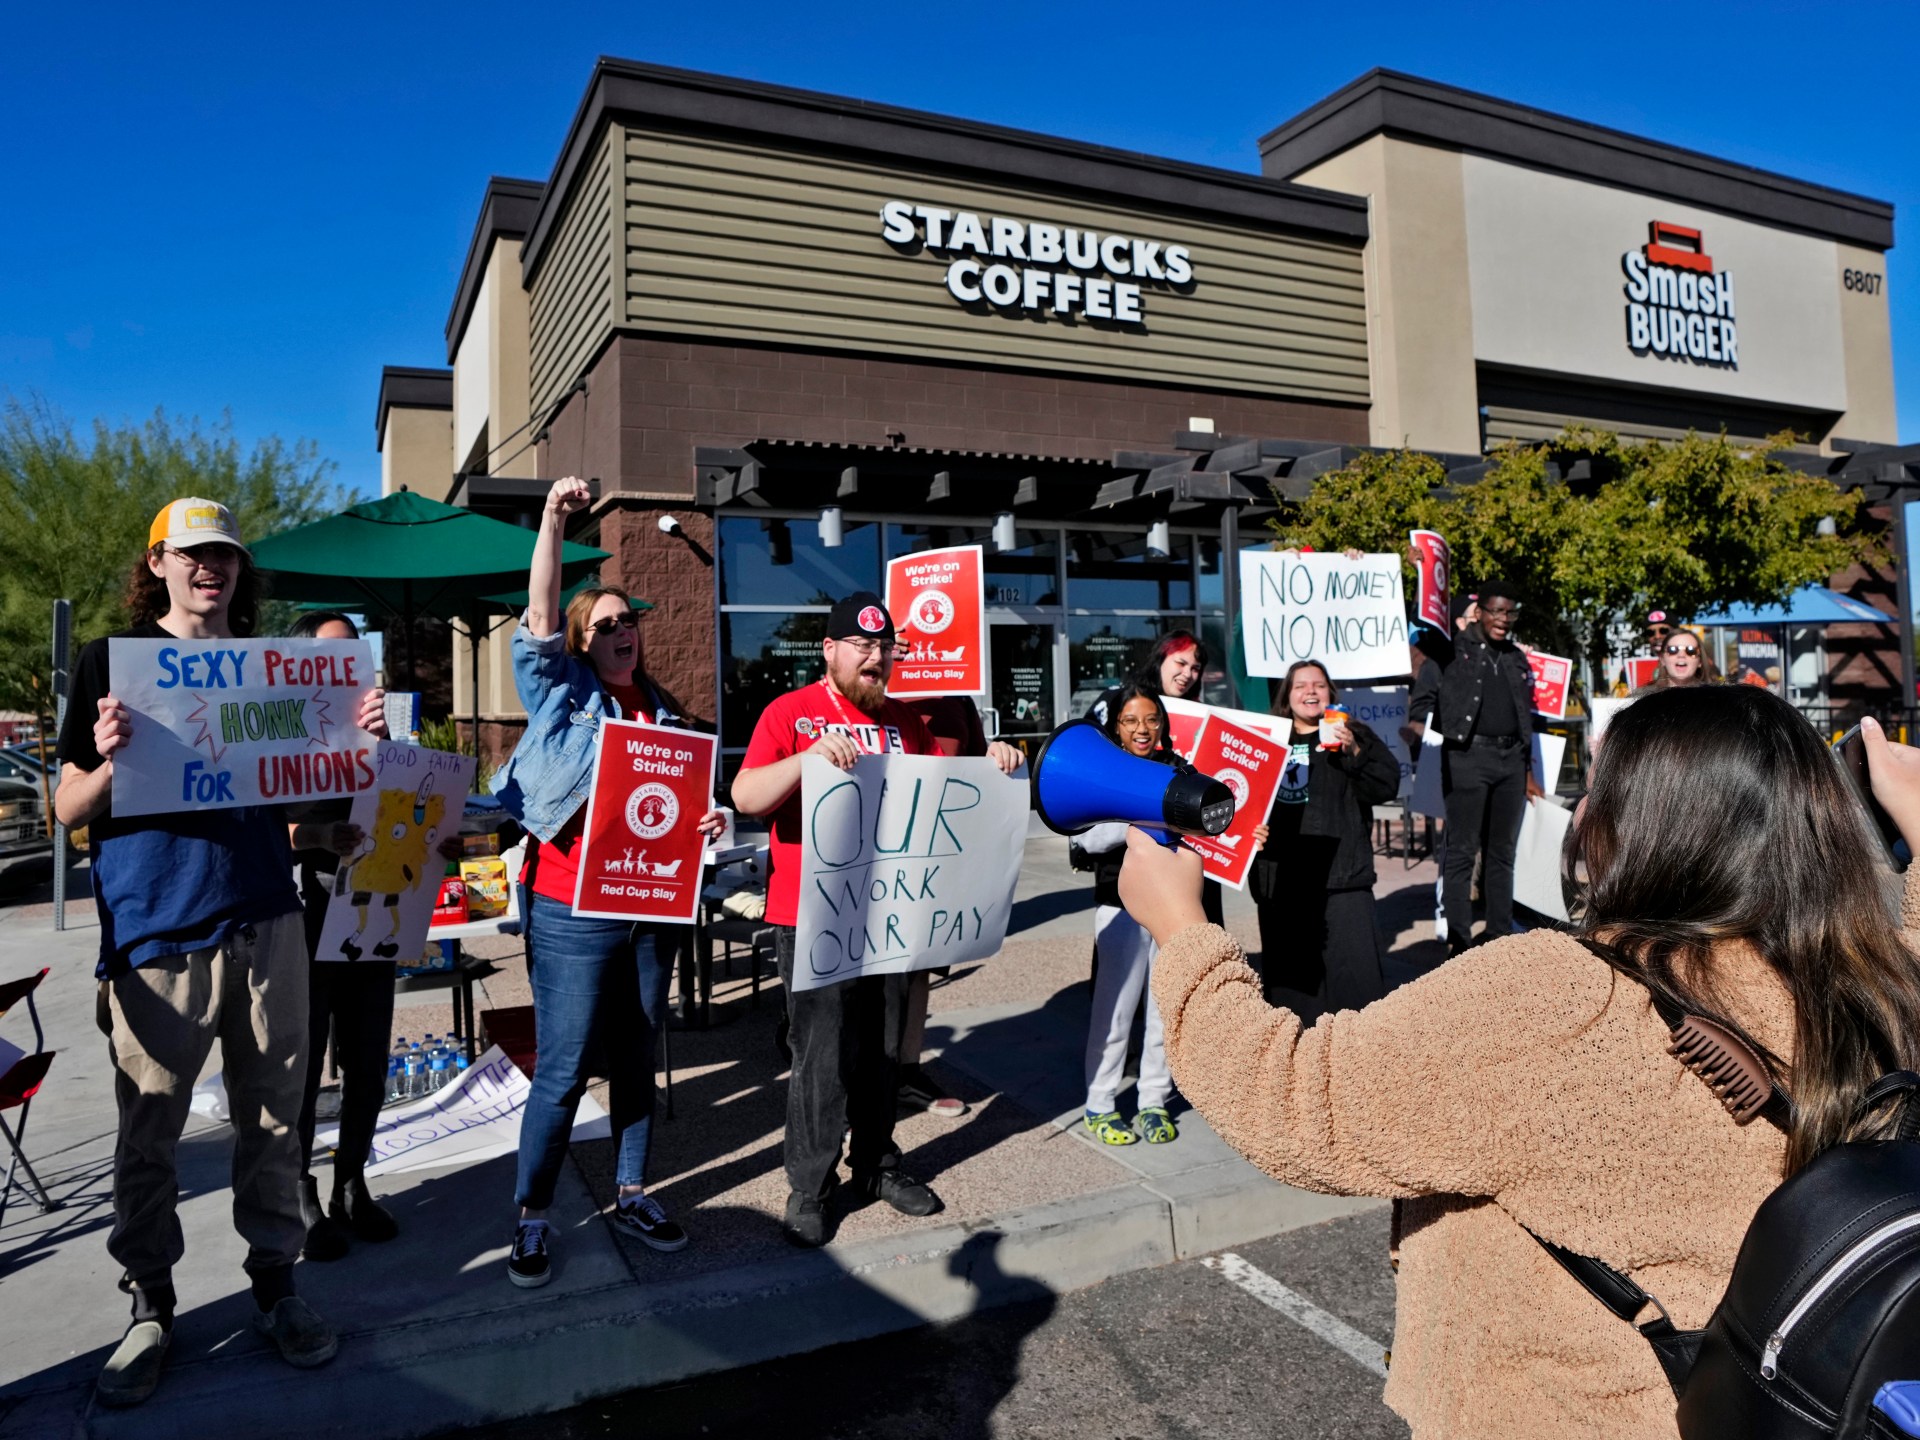 Starbucks employees strike at greater than 100 US shops | Labour Rights Information